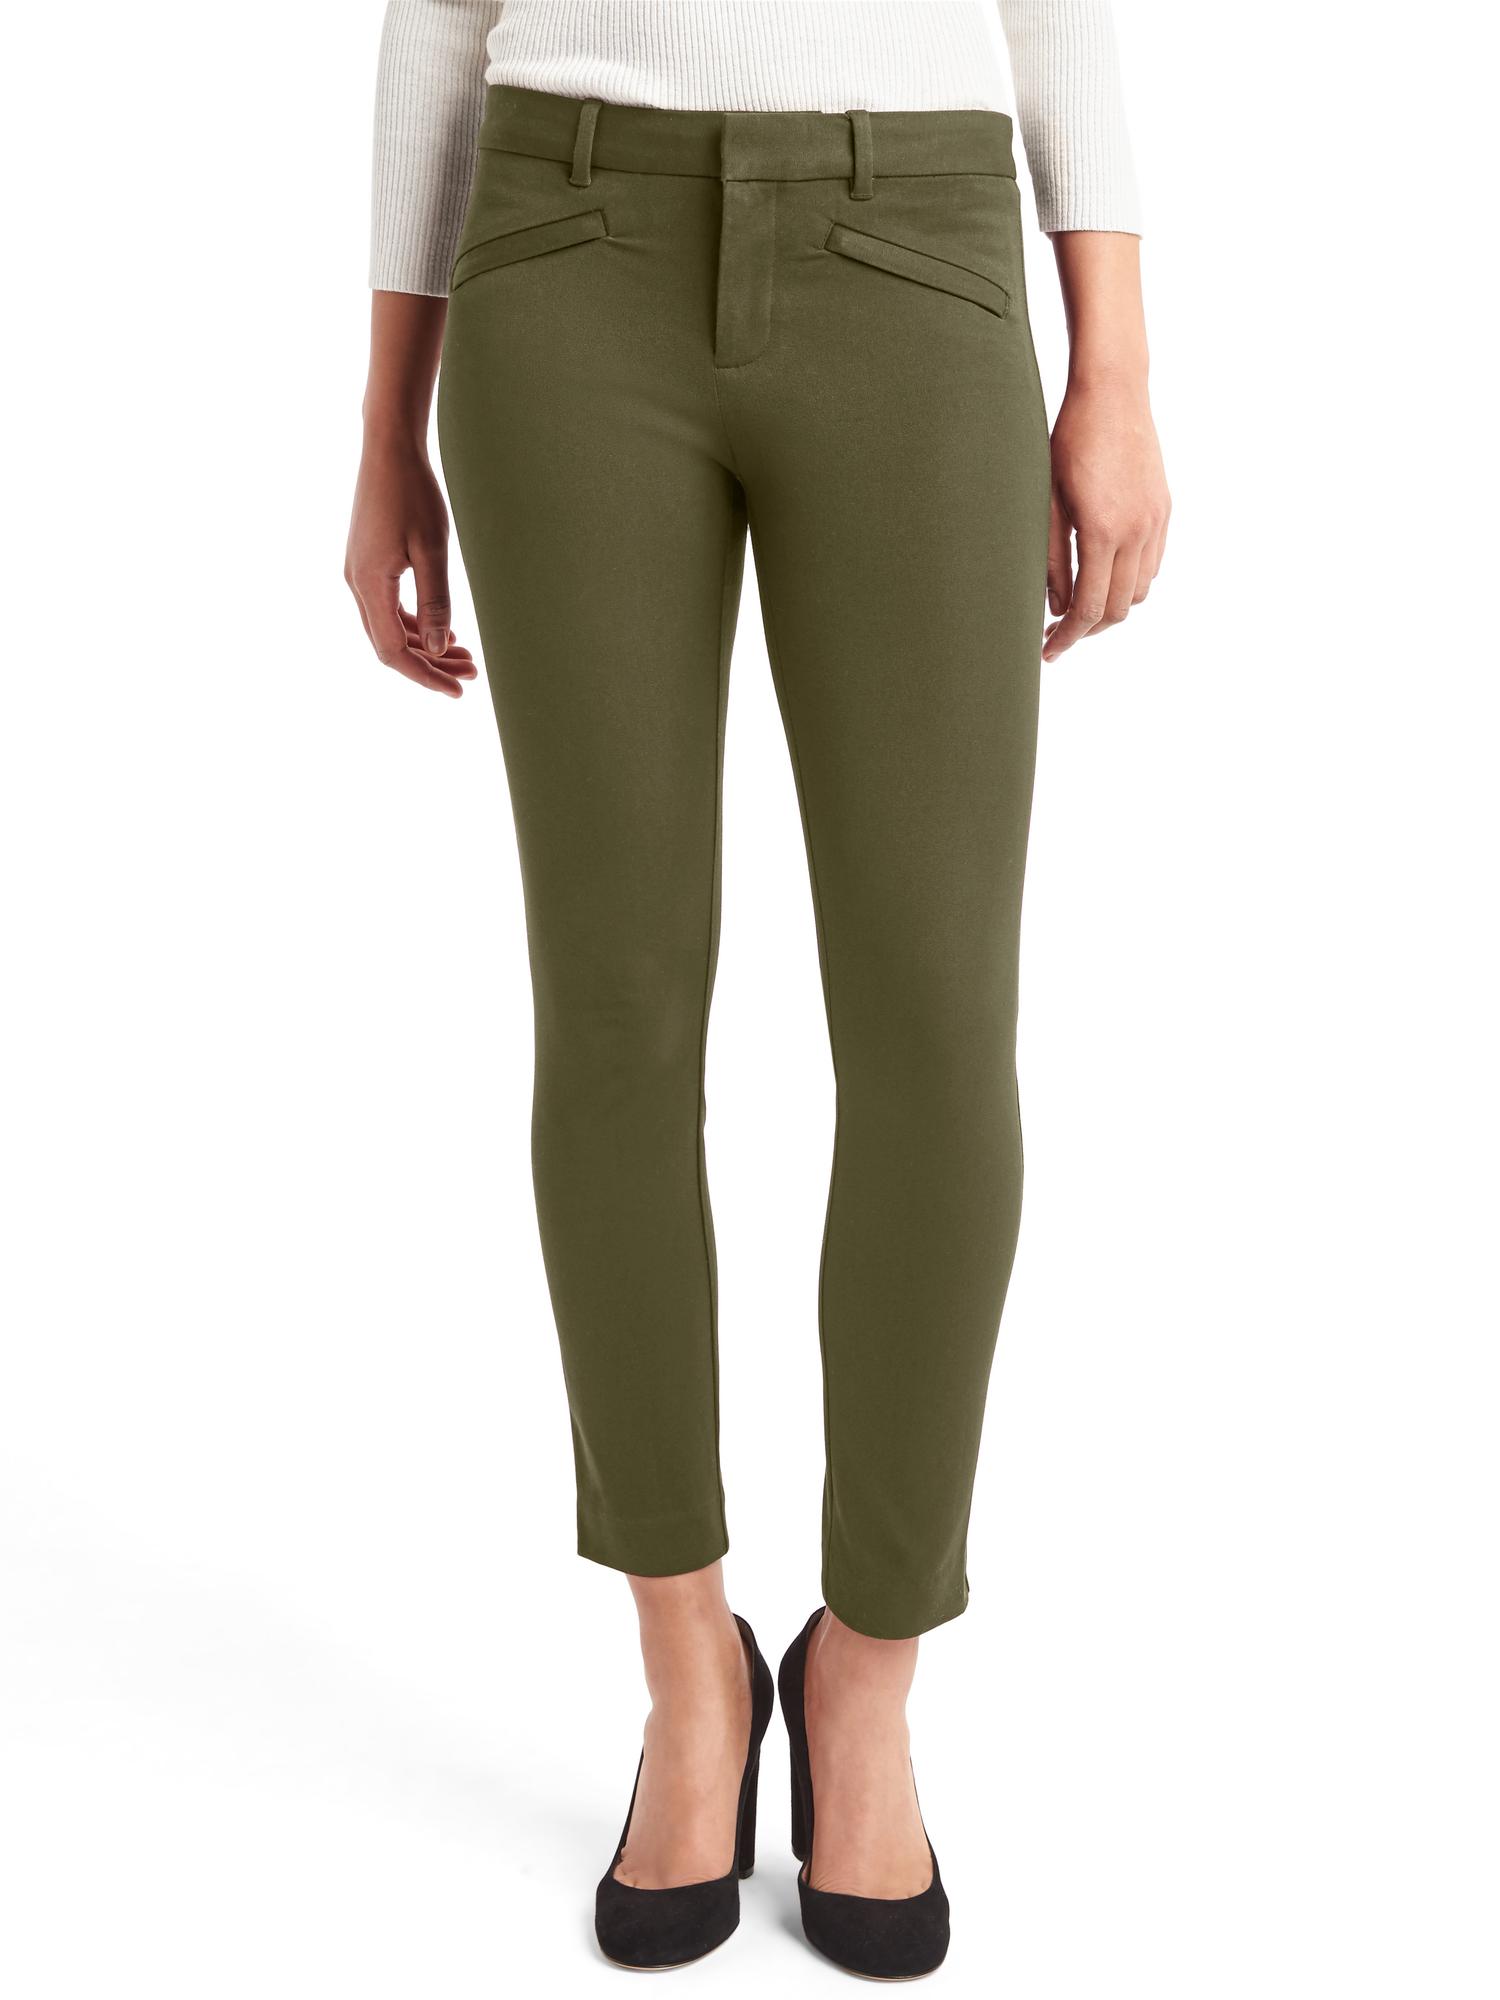 Tailored crepe ankle pant, Contemporaine, Shop Women%u2019s Skinny Pants  Online in Canada